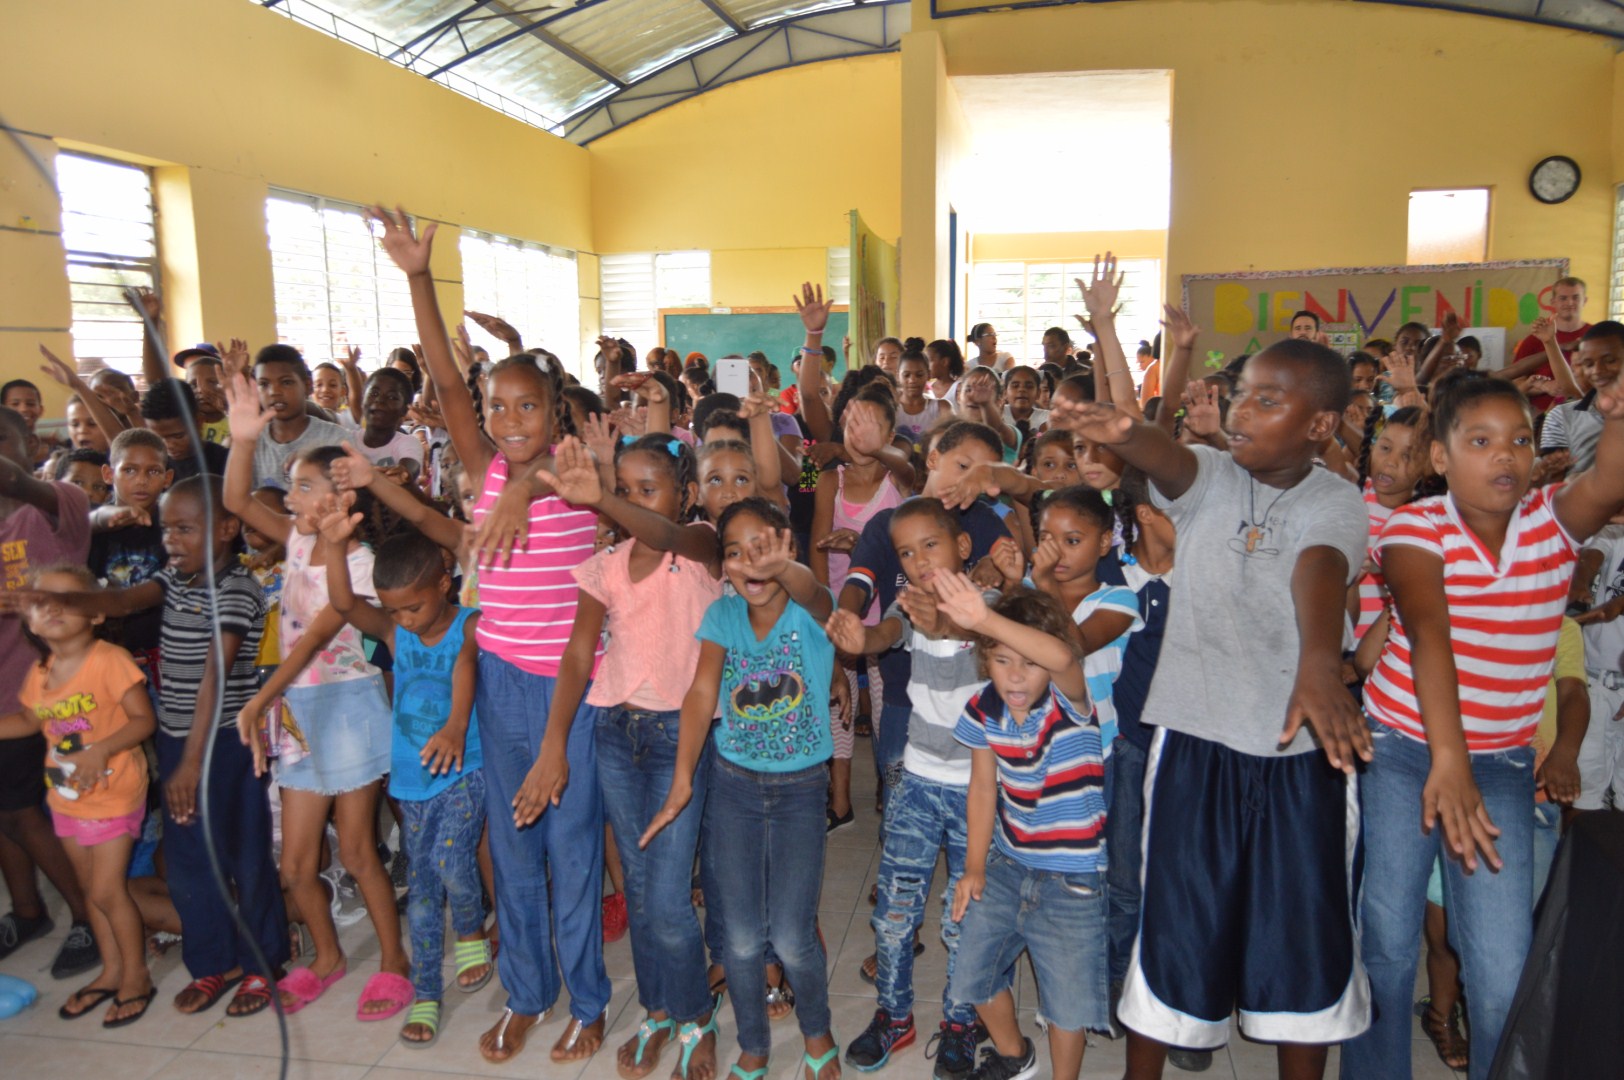 Children in a classroom, standing closely together and raising their hands